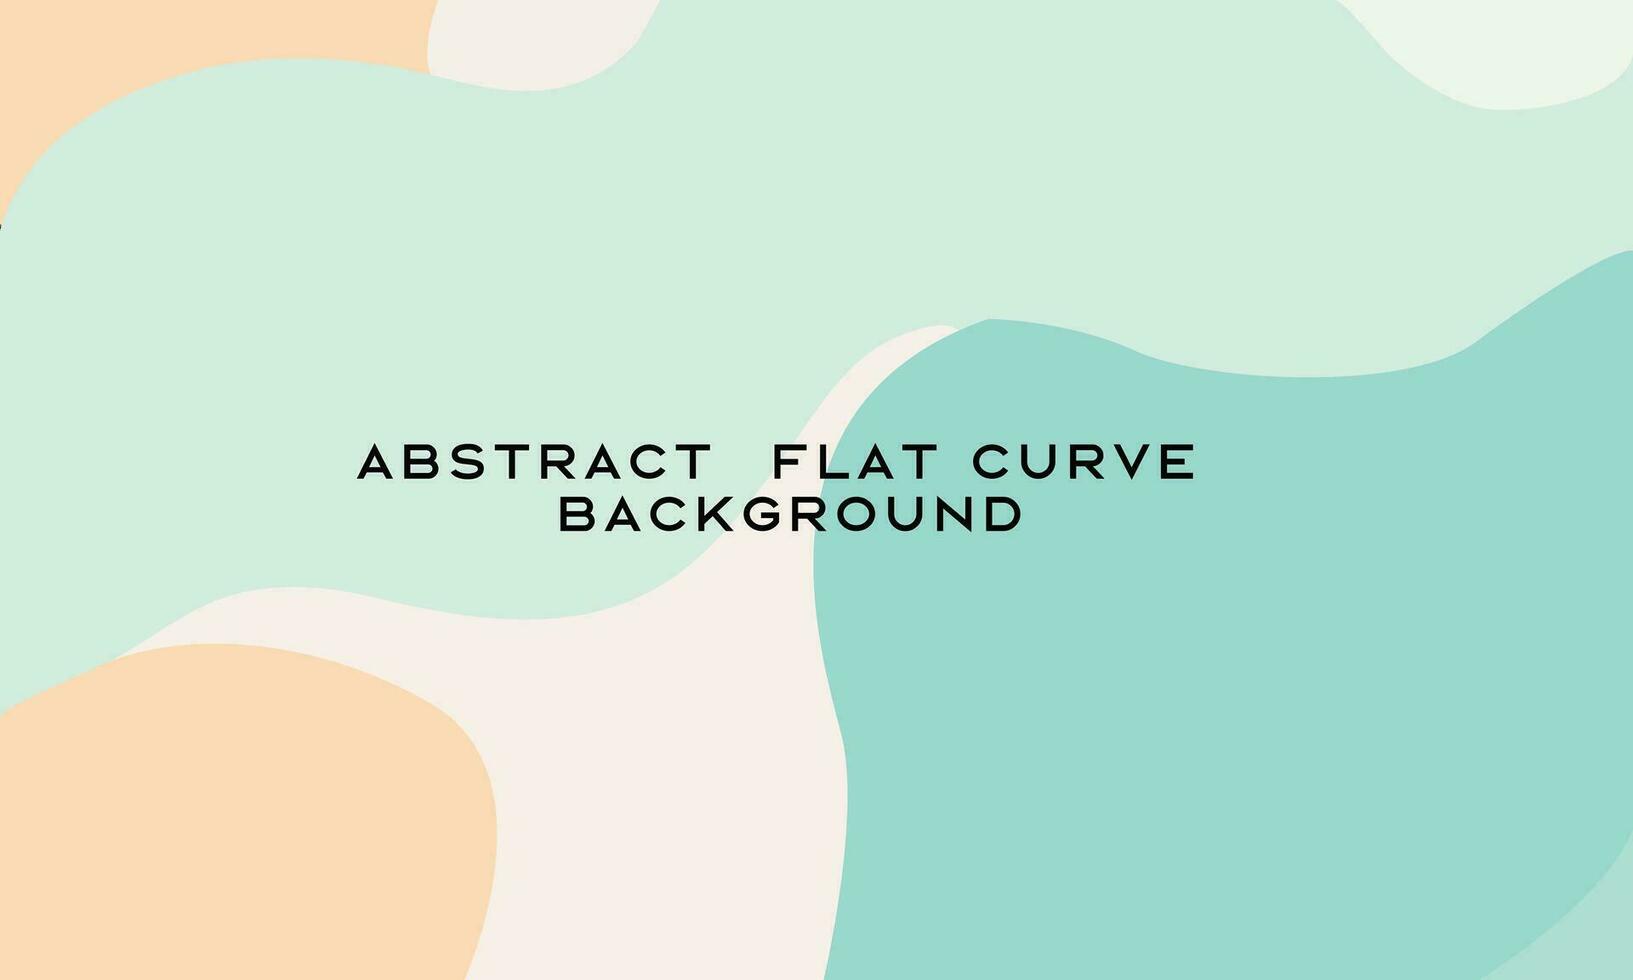 Abstract flat curve background design for linked In cover page vector